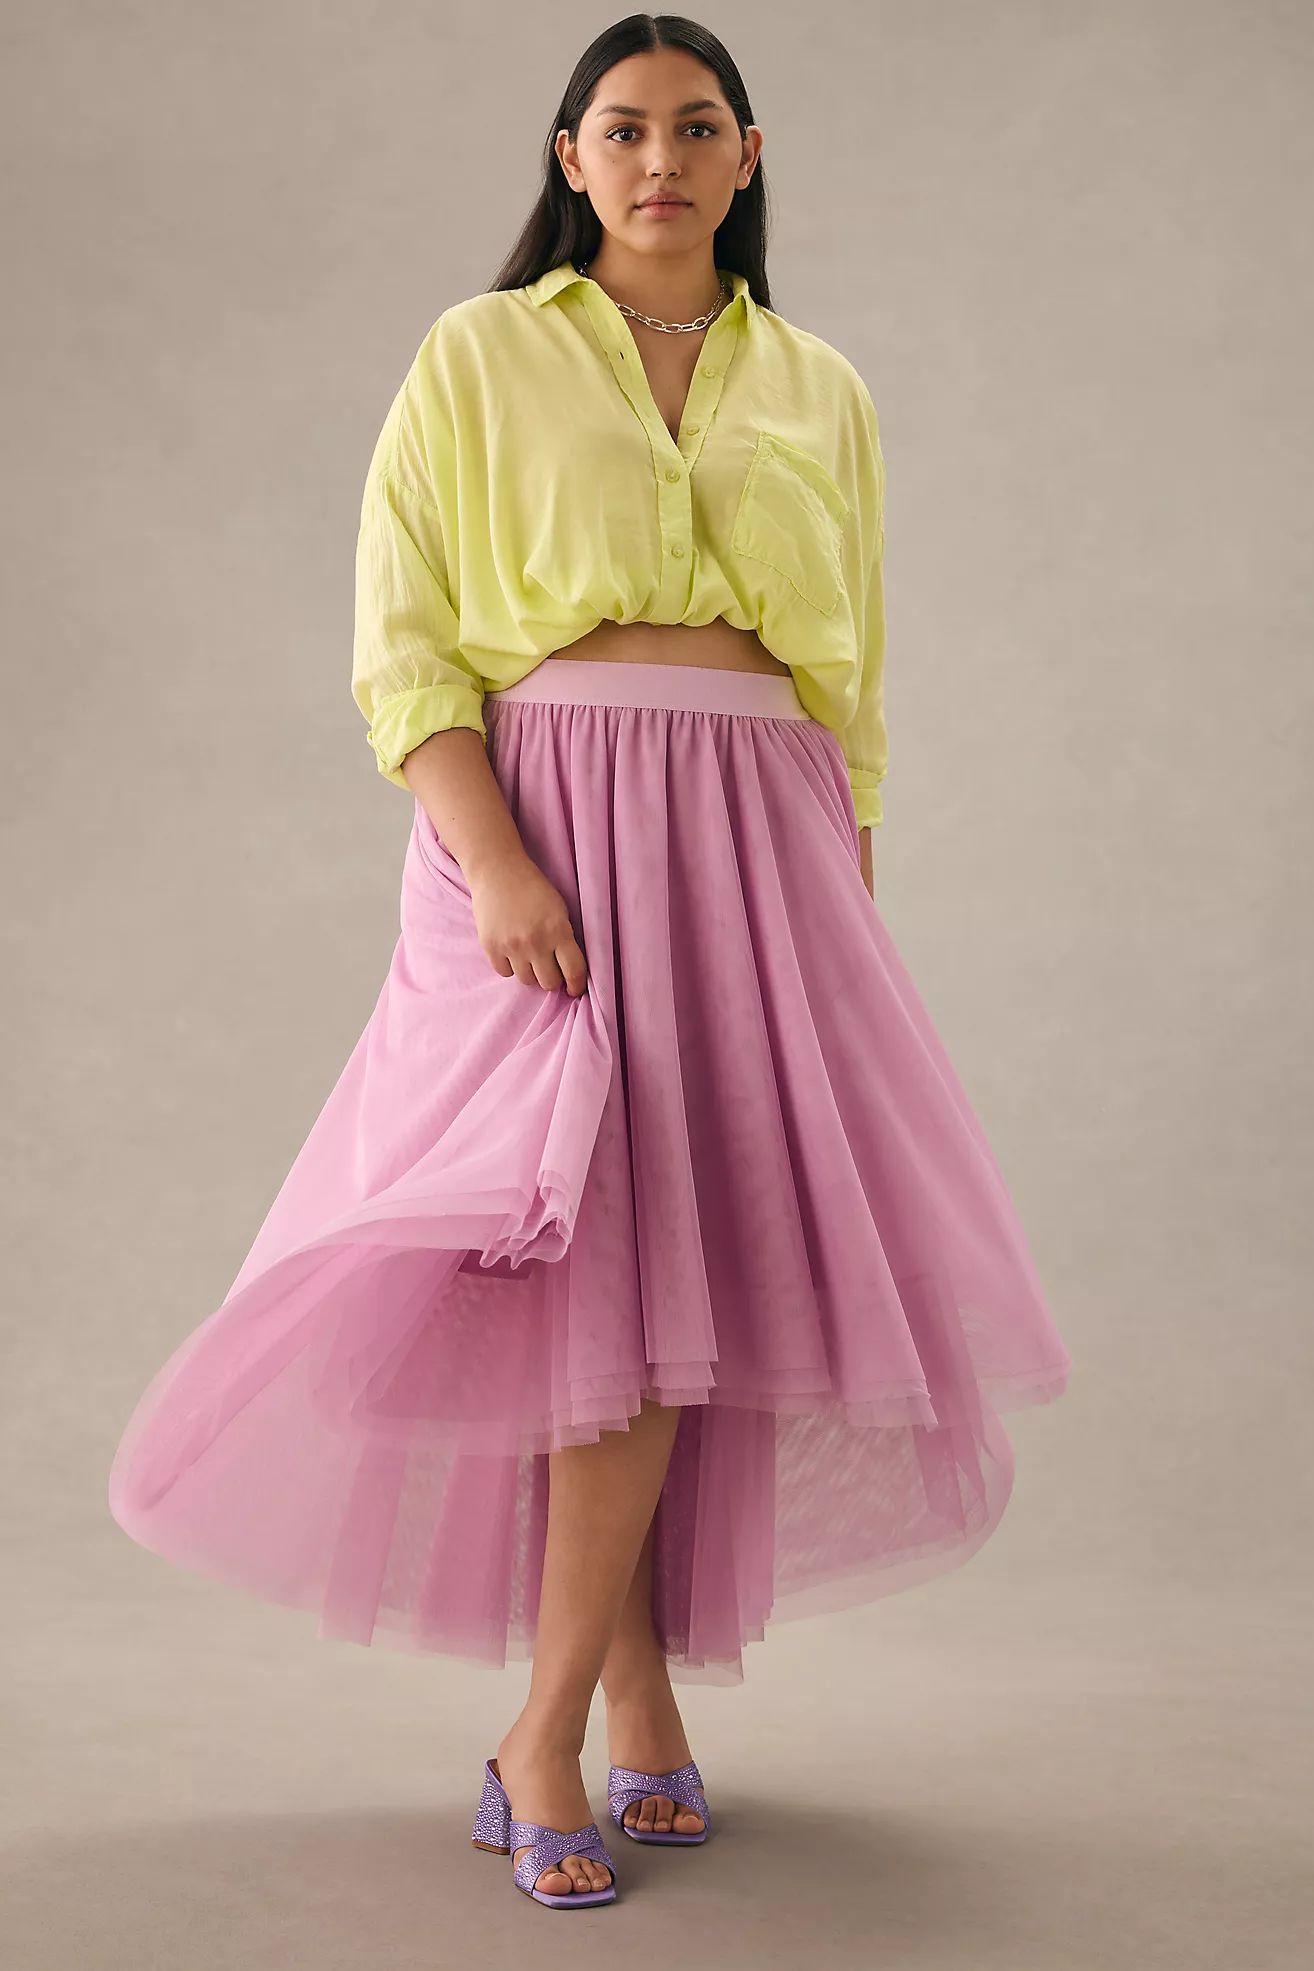 By Anthropologie Tulle Appliqué Skirt | Anthropologie (US)